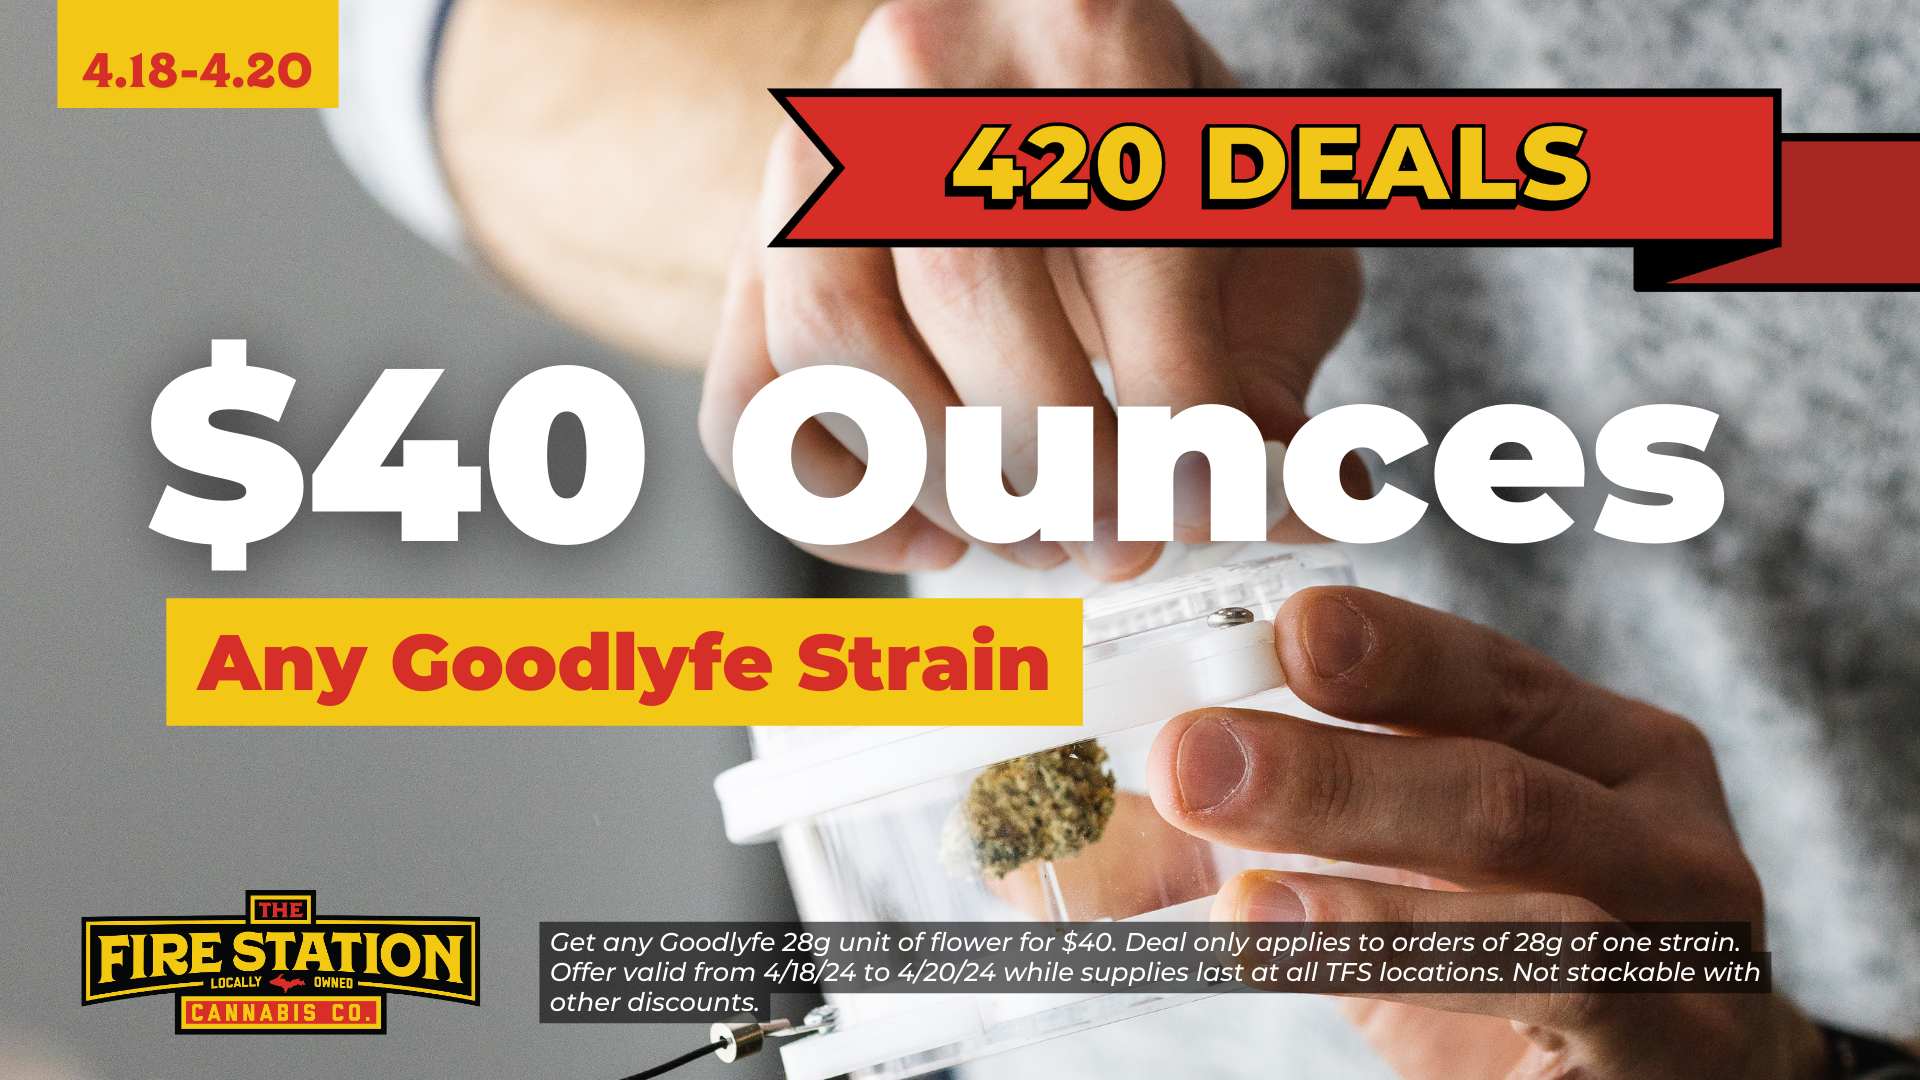 Get any Goodlyfe 28g unit of flower for $40. Deal only applies to orders of 28g of one strain. Offer valid from 4/18/24 to 4/20/24 while supplies last at all TFS locations. Not stackable with other discounts.